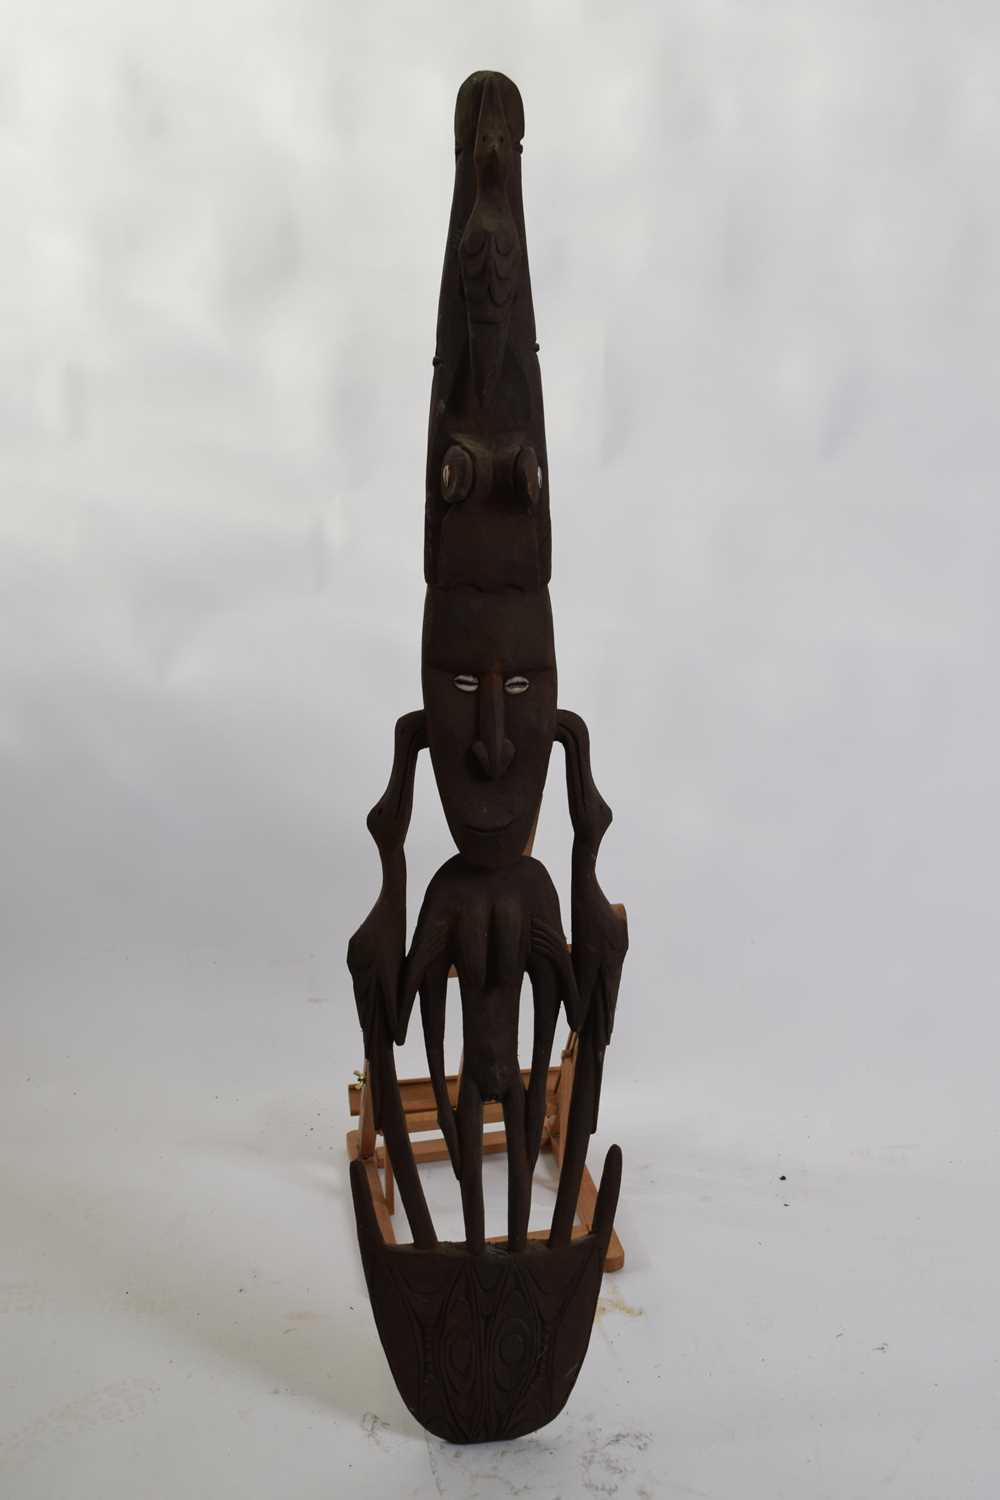 Tribal/ethnographica interest - Papua New Guinea wall hanging food hook of hybrid anthropomorphic